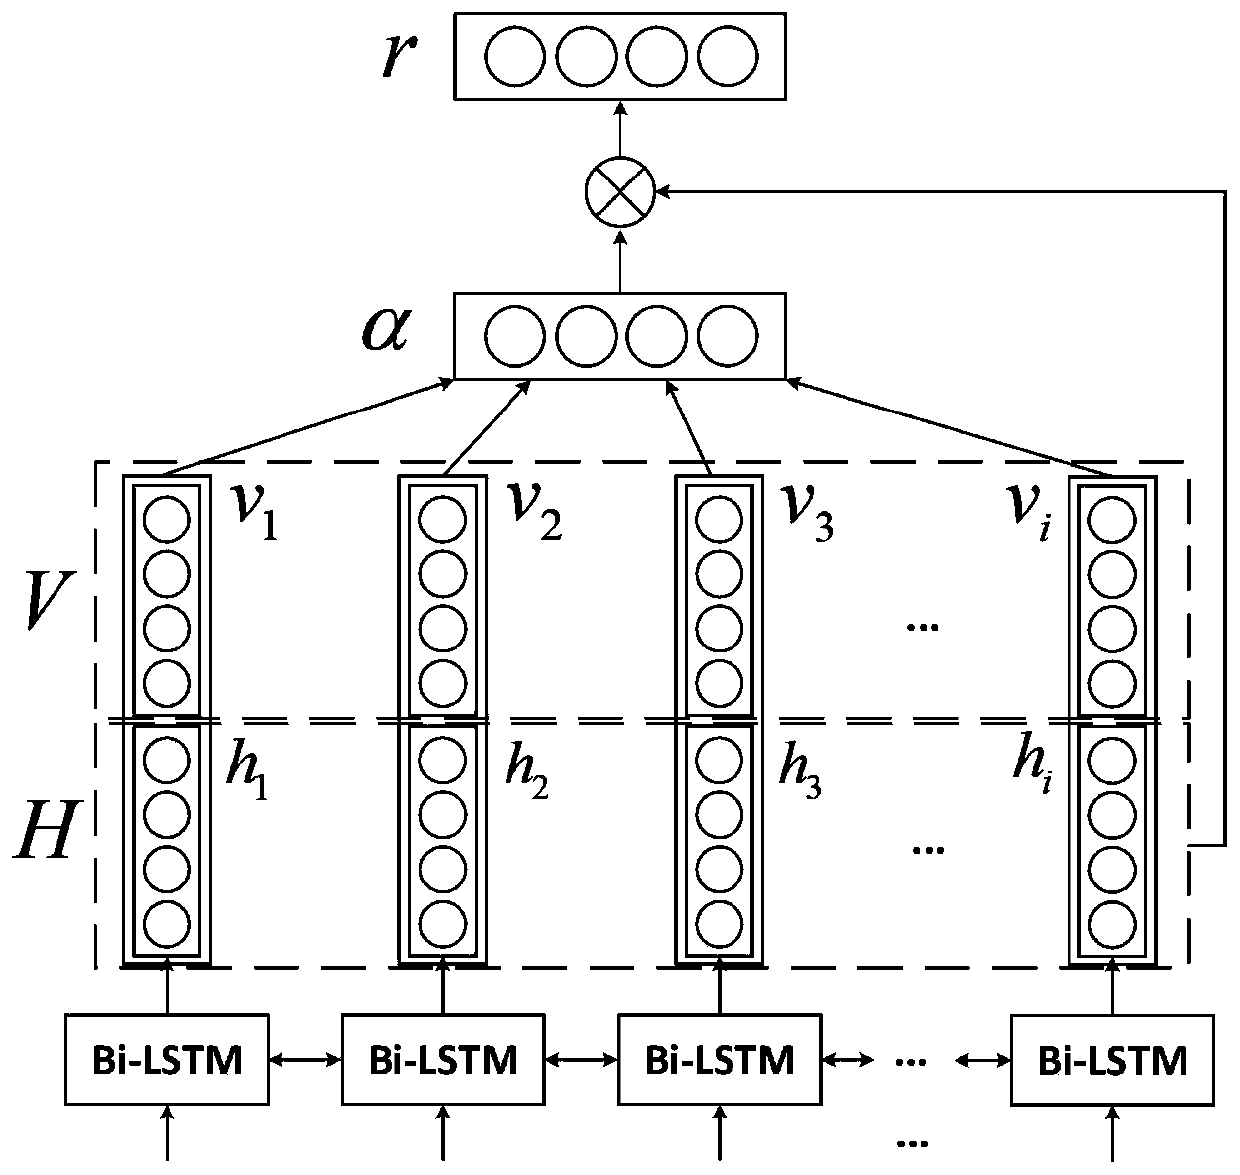 Case-related news viewpoint sentence recognition method based on BERT and BiLSTM-Attention